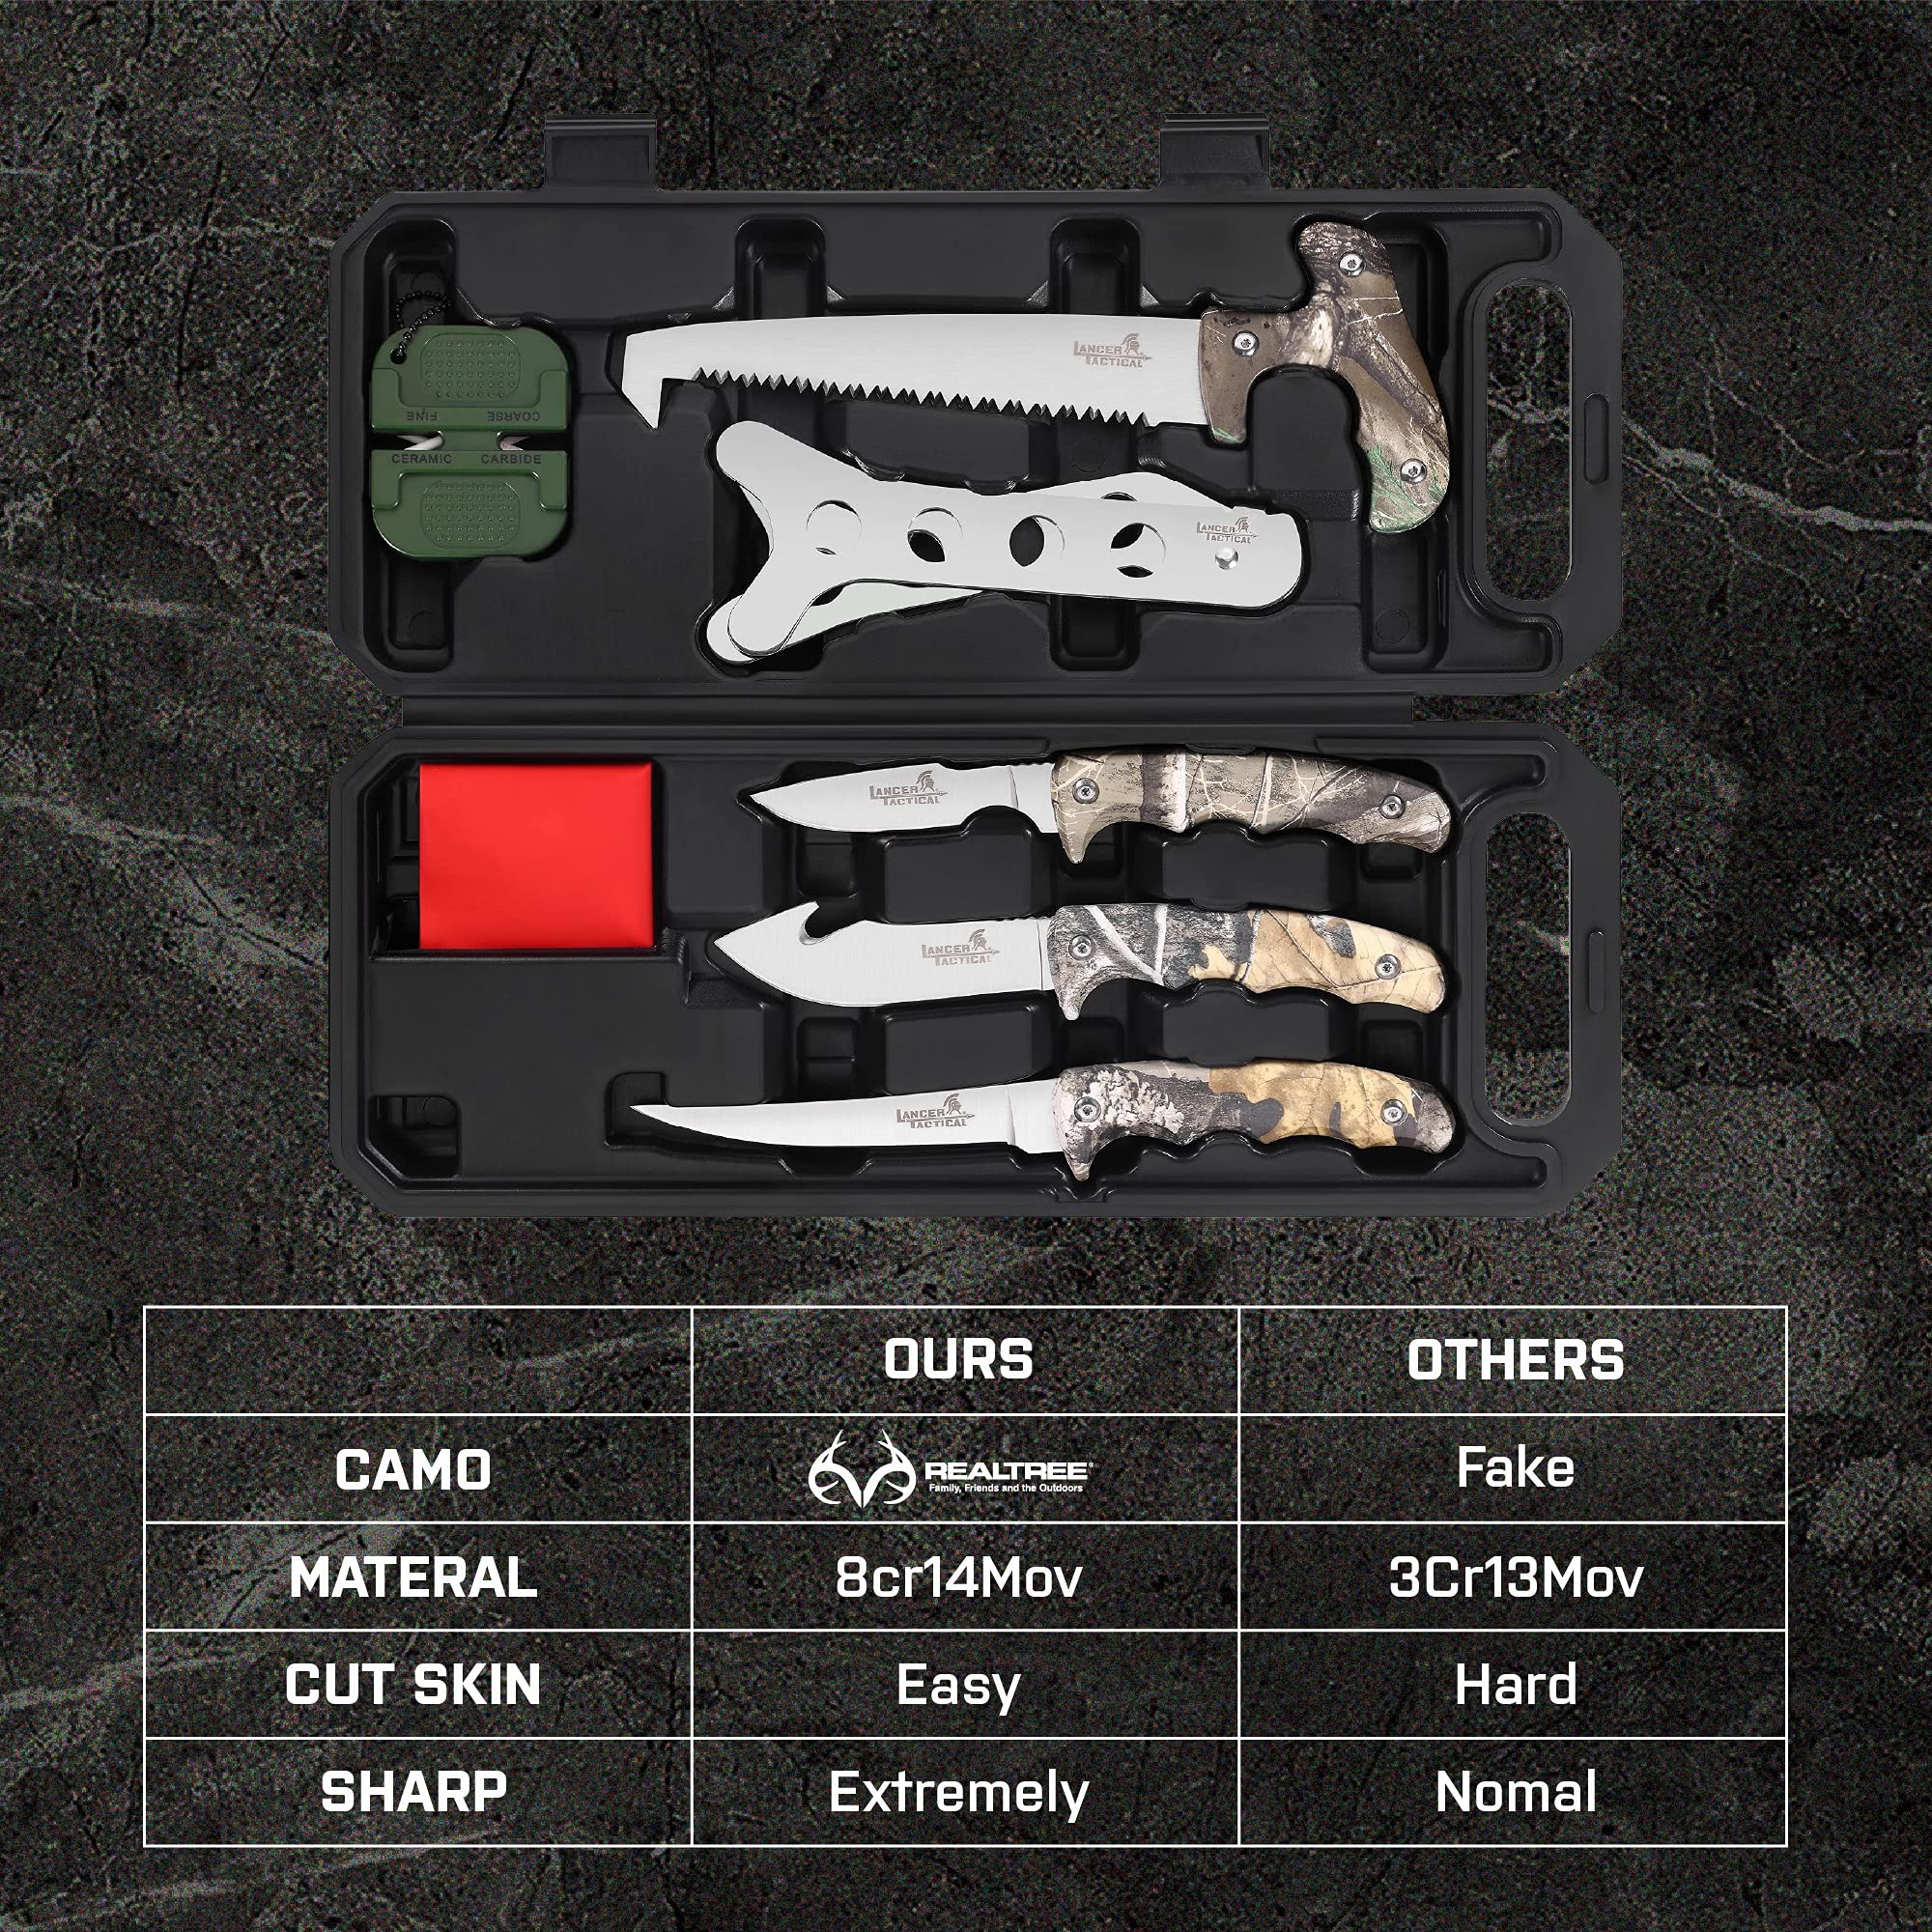 LANCERGEAR Field Dressing Kit Hunting Knife Set, Portable Hunting Accessories for Men, Hunting Stuff, Hunters, for Hunting, Survival, Fishing, Camping